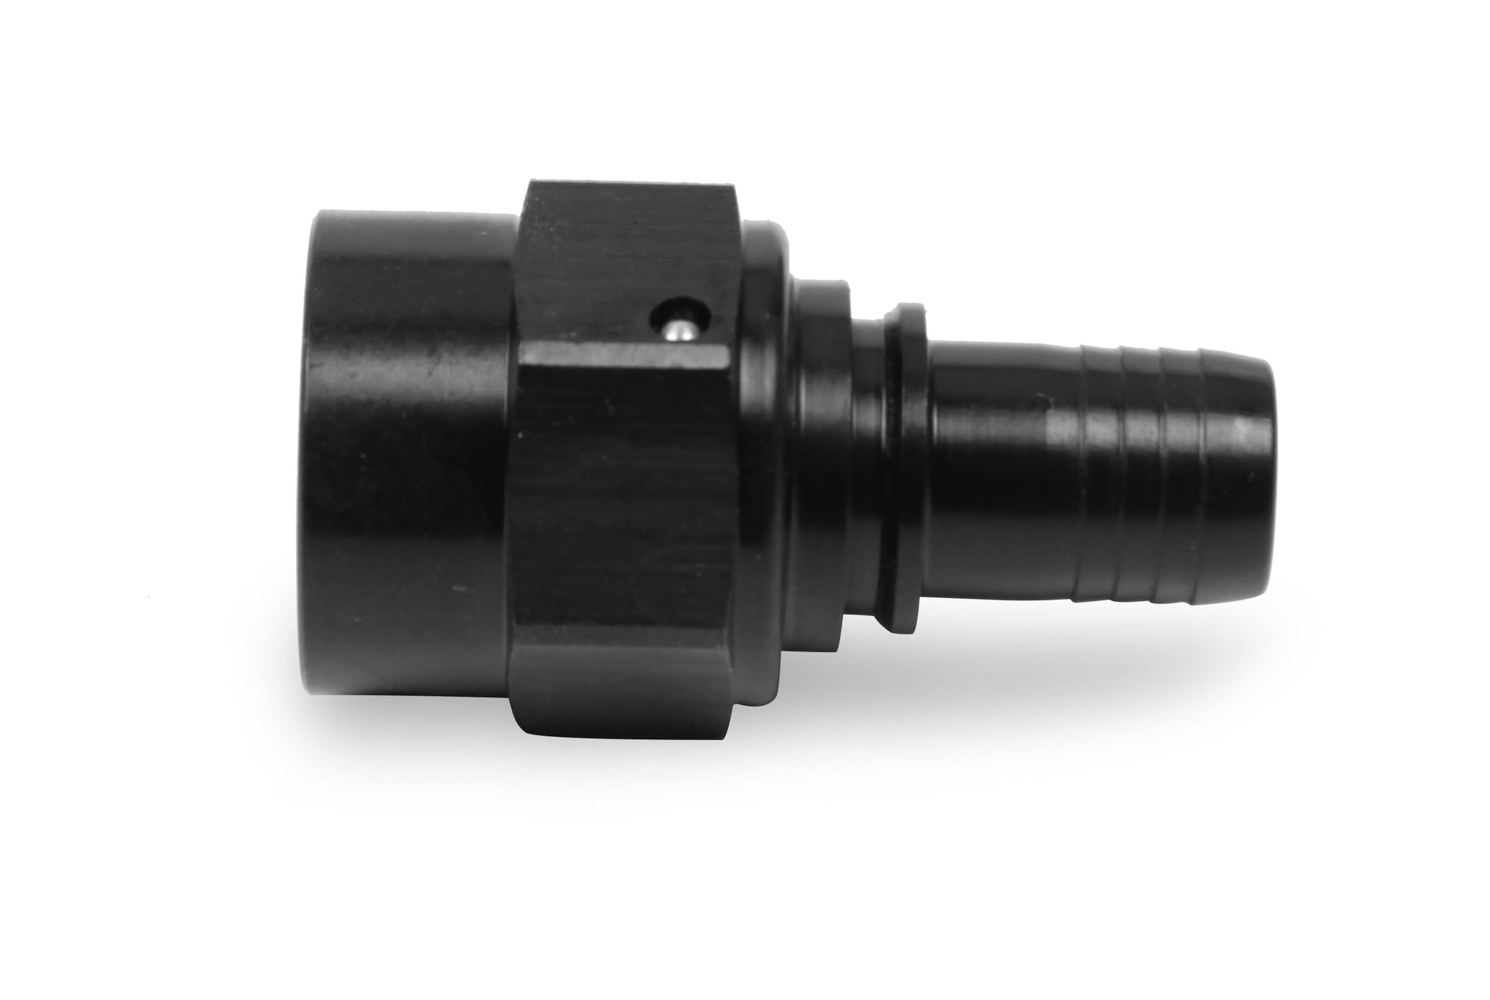 Earls 680106ERL Fitting, Hose End, Ultra-Pro, Straight, 6 AN Hose Barb to 6 AN Female, Aluminum, Black Anodized, Each